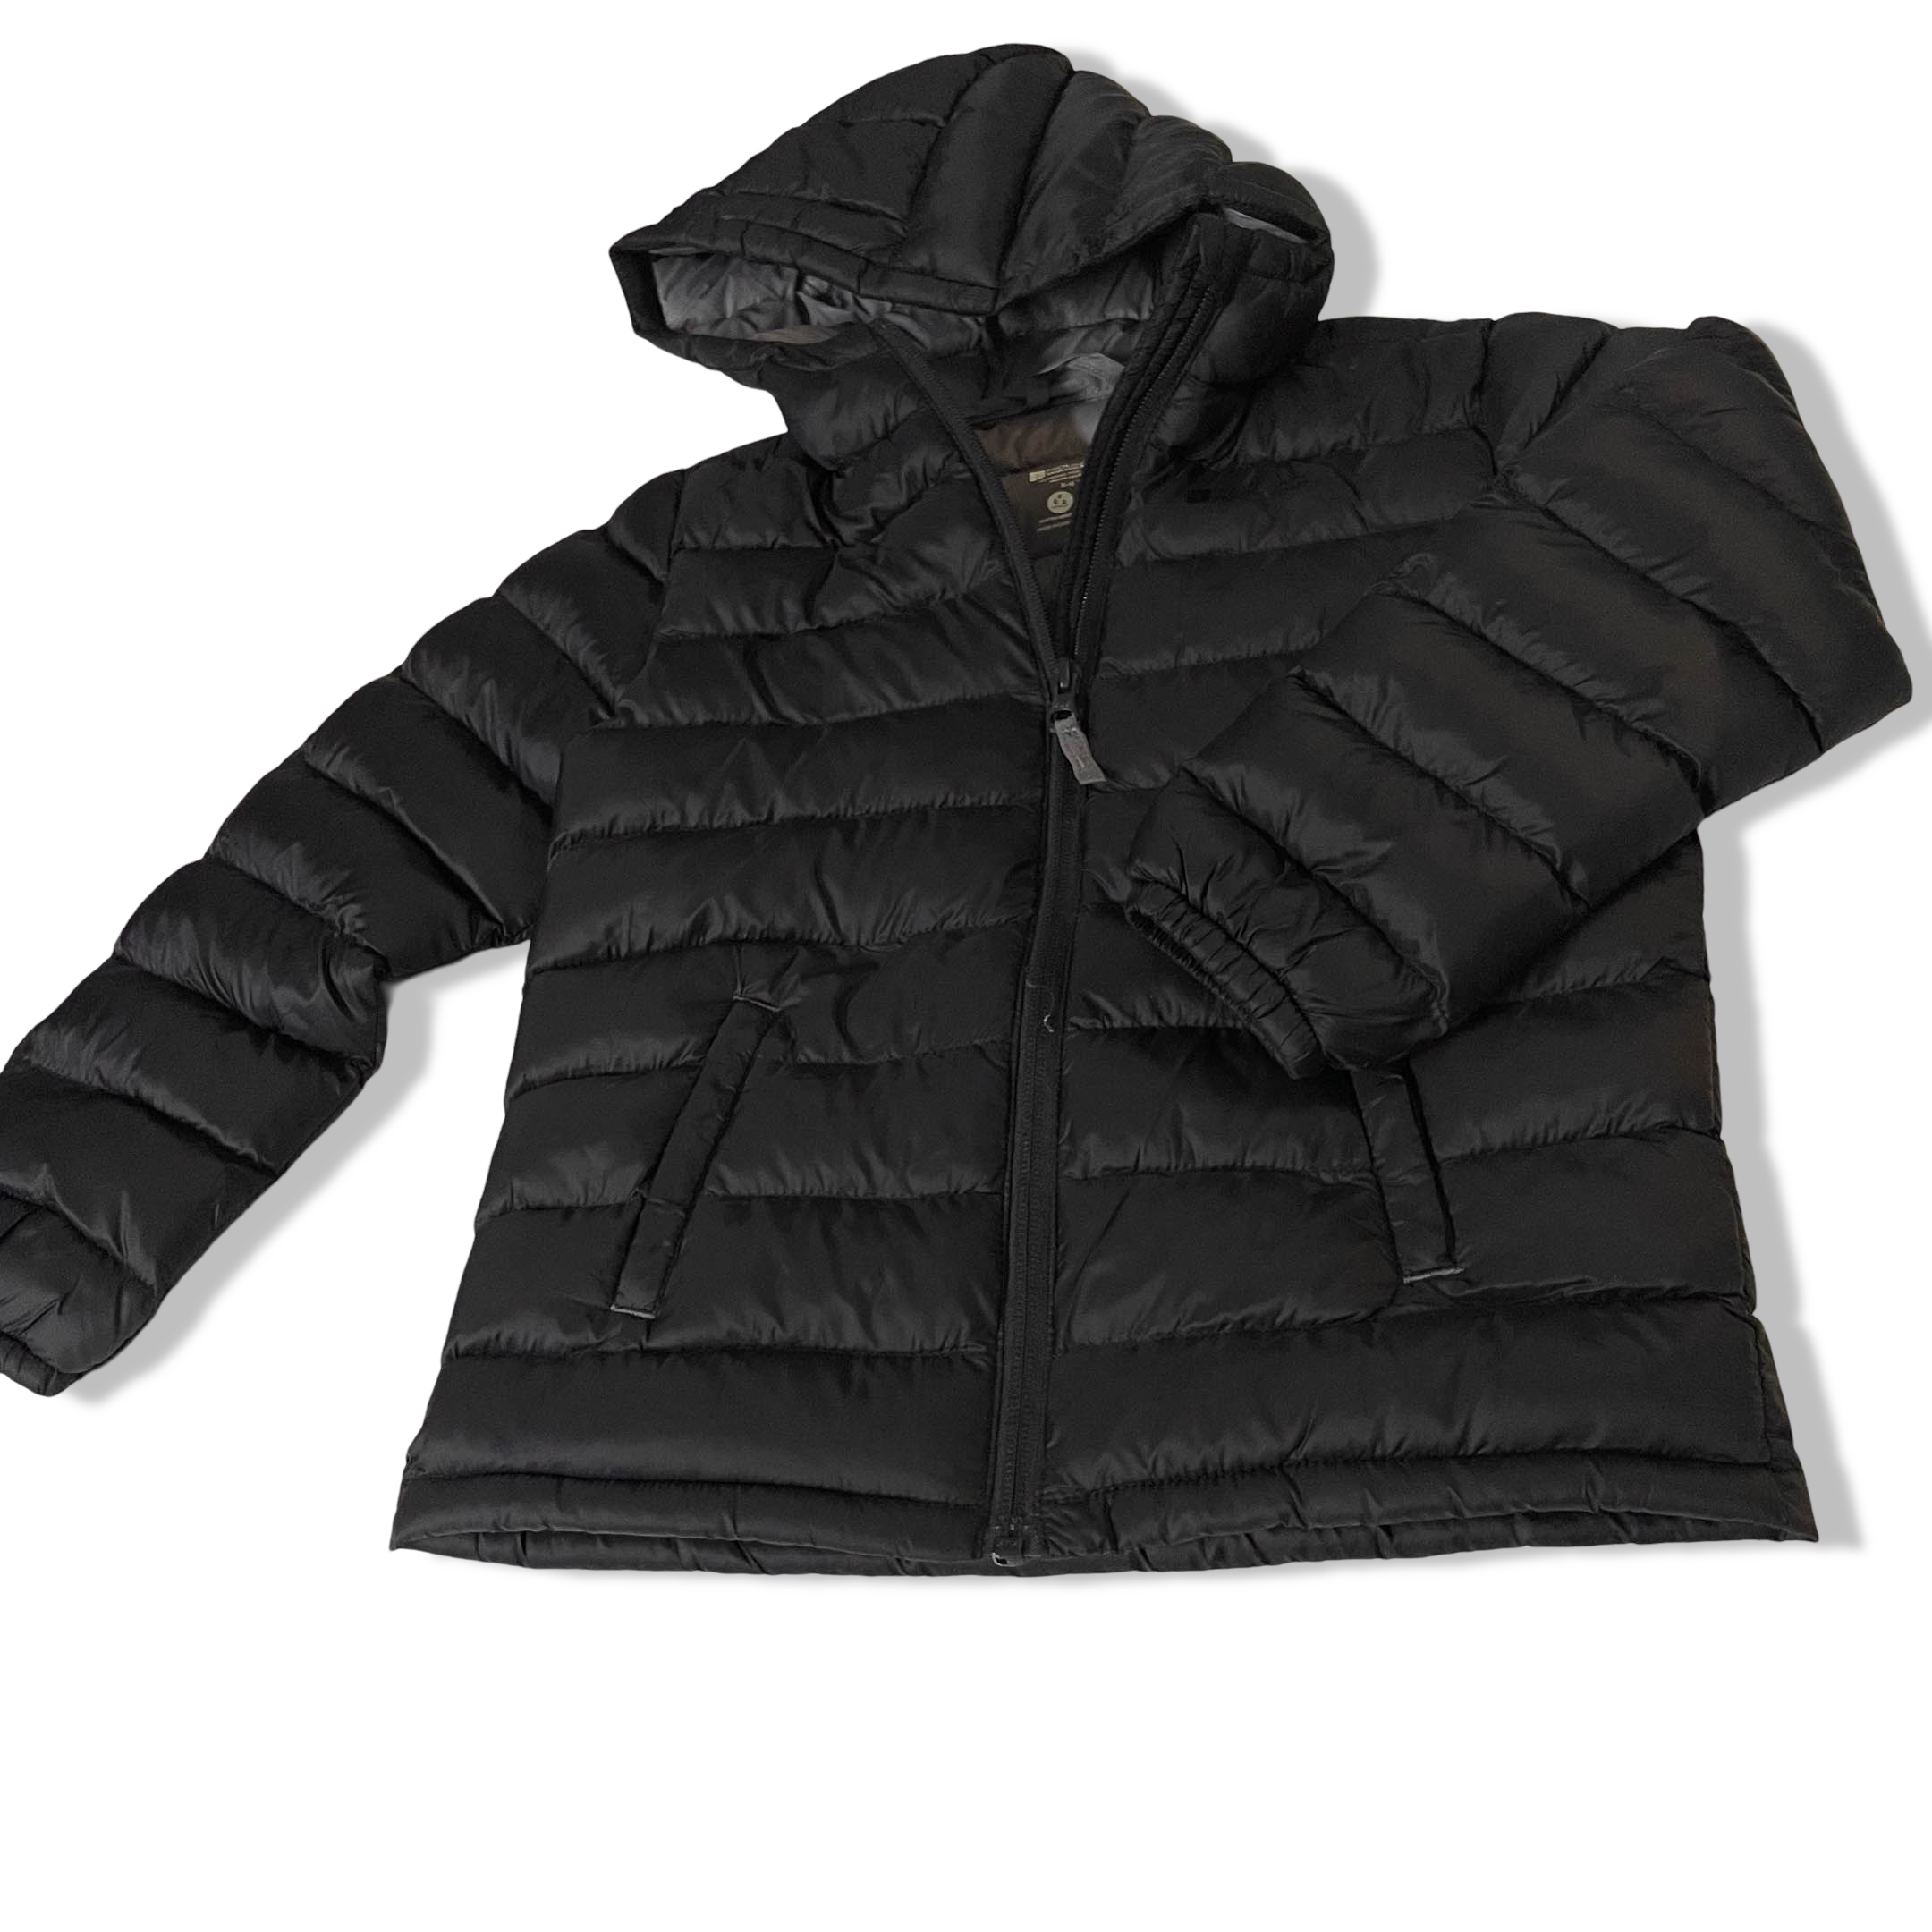 Vintage Mountain Warehouse Made in China Quilted black Puffer jacket for 5-6YRS